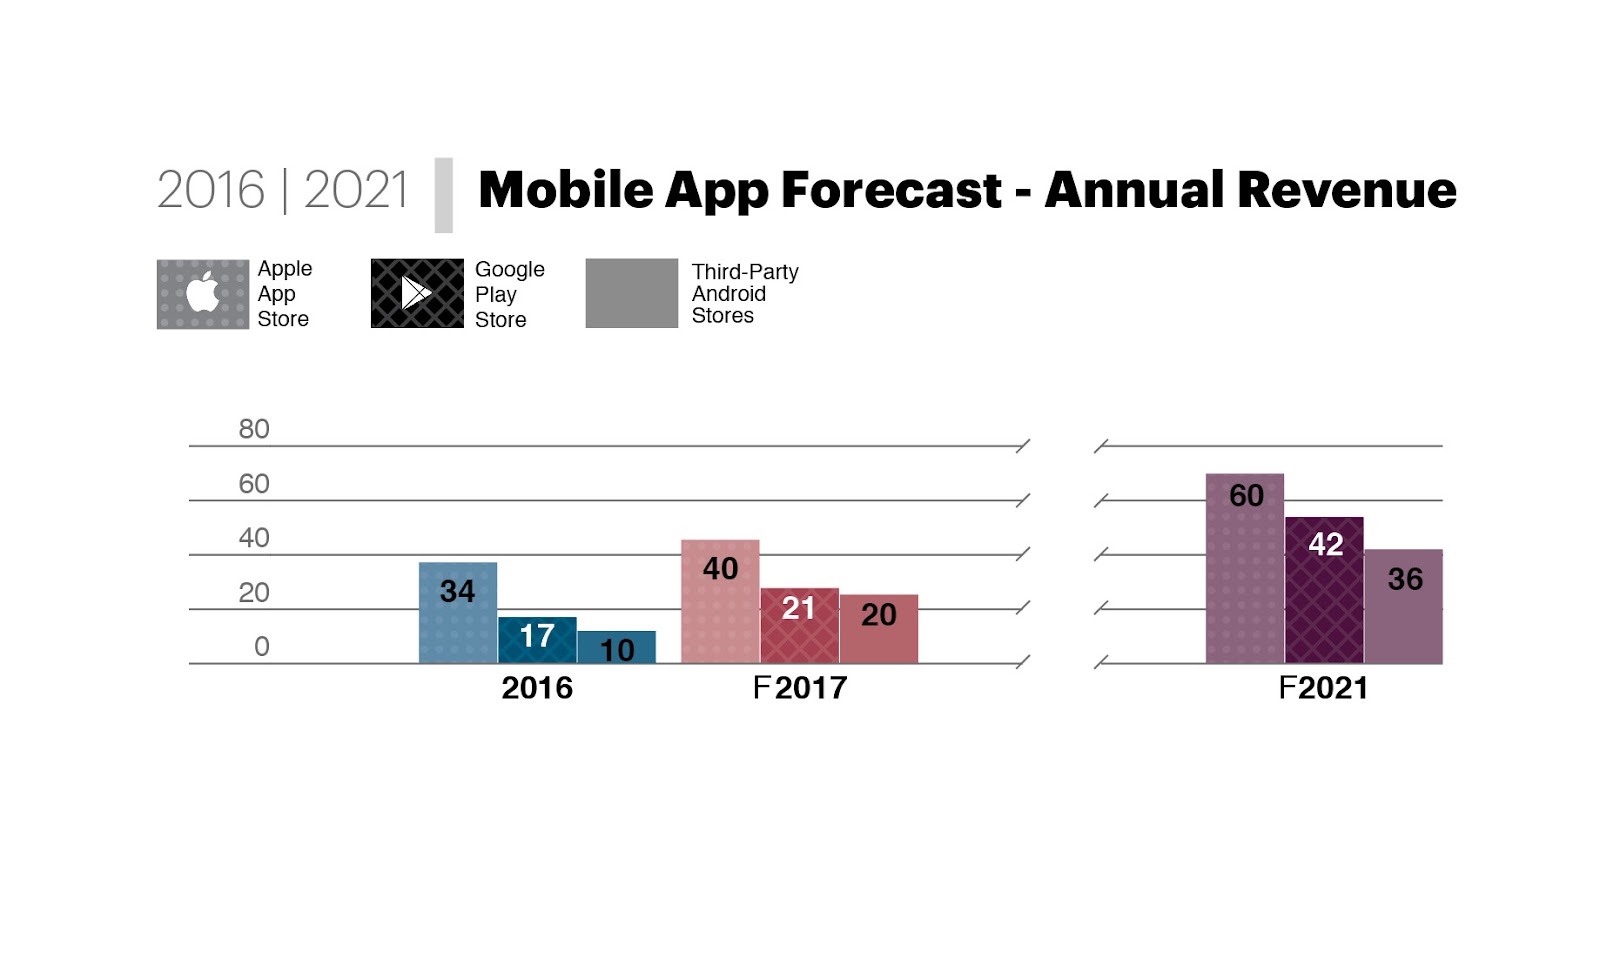 Mobile App Forecast. Third-Party App Stores have USD 10 billion in revenues in 2016 and are projected to have USD 36 billion in 2021. 